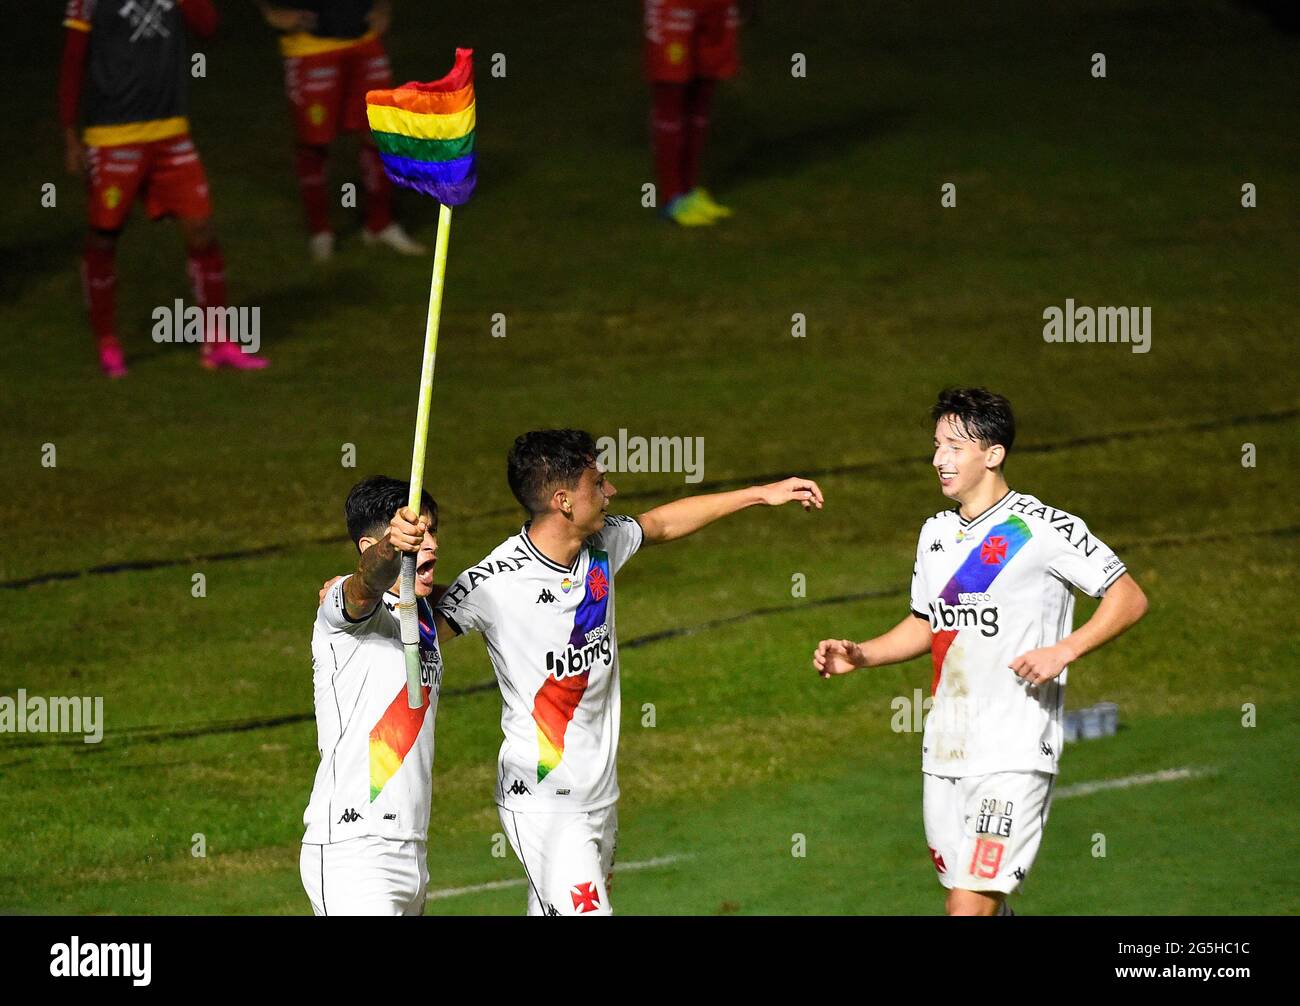 Rio de Janeiro-Brazil June 27, 2021, player German Cano of Vasco da Gama team, scores the first goal of the match against Brusque team and raises the rainbow flag, symbol of LGBT pride at São Januario stadium, valid for series B of the Brazilian soccer championship Credit: Andre Paes/Alamy Live News Stock Photo